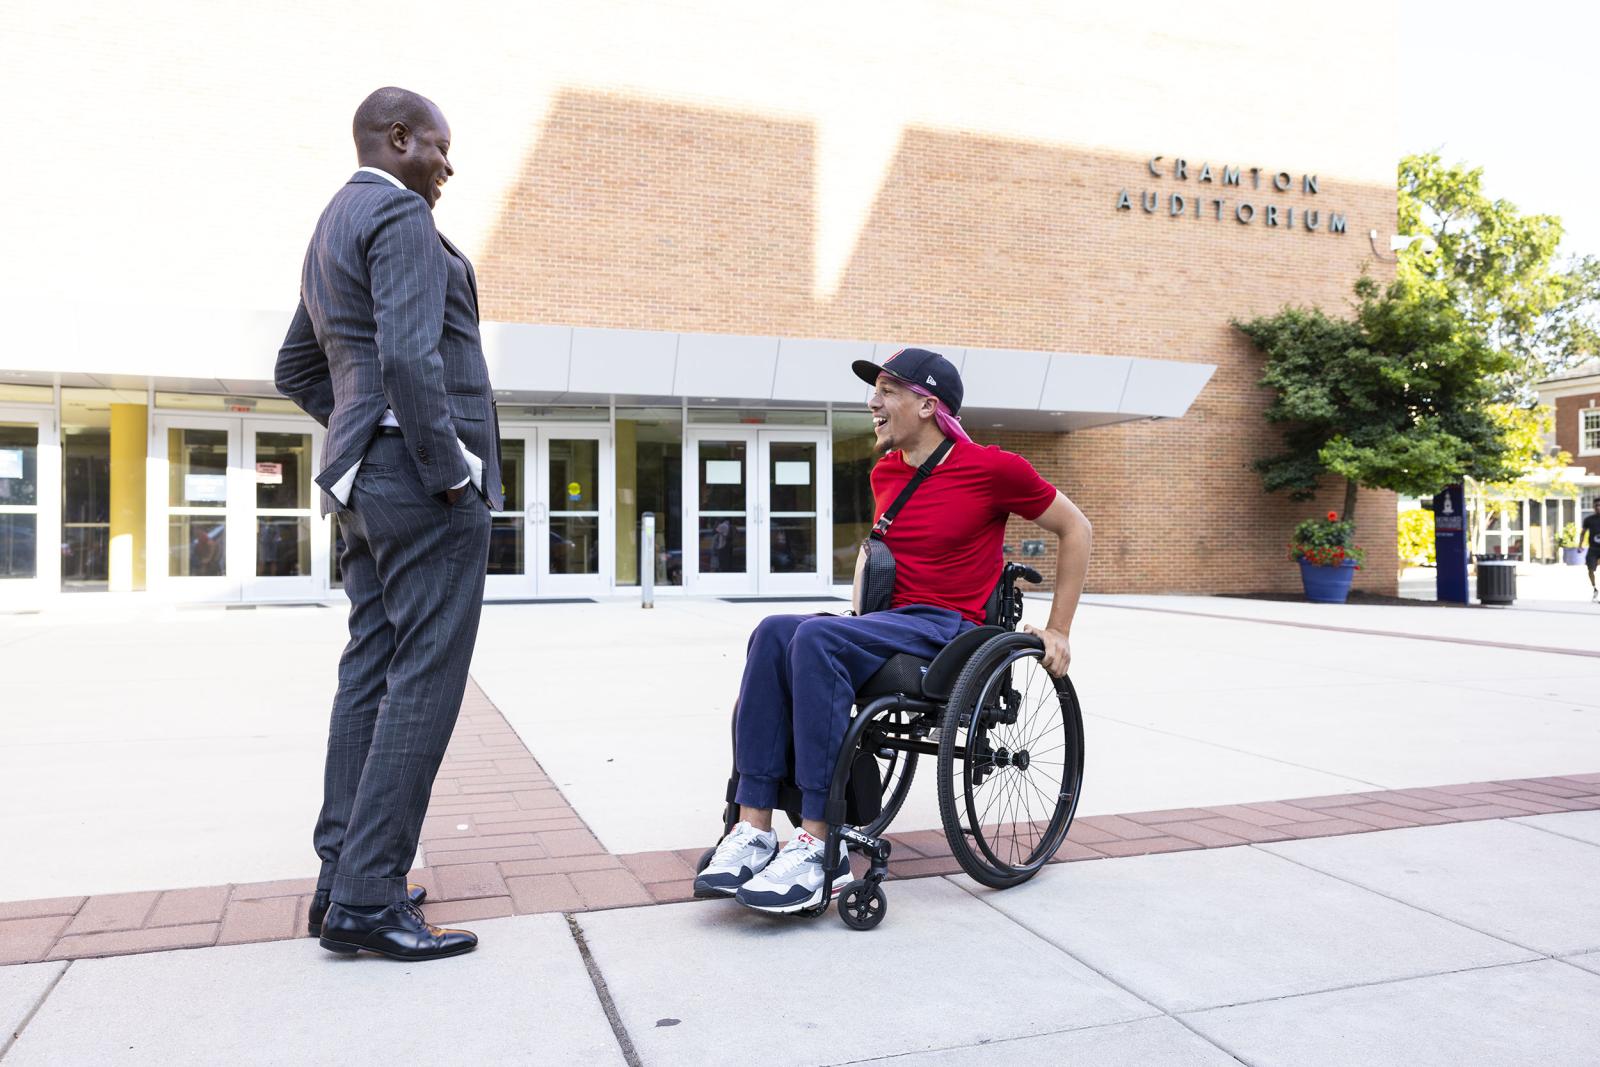 Dr. Frederick with student in red shirt and wheelchair outside